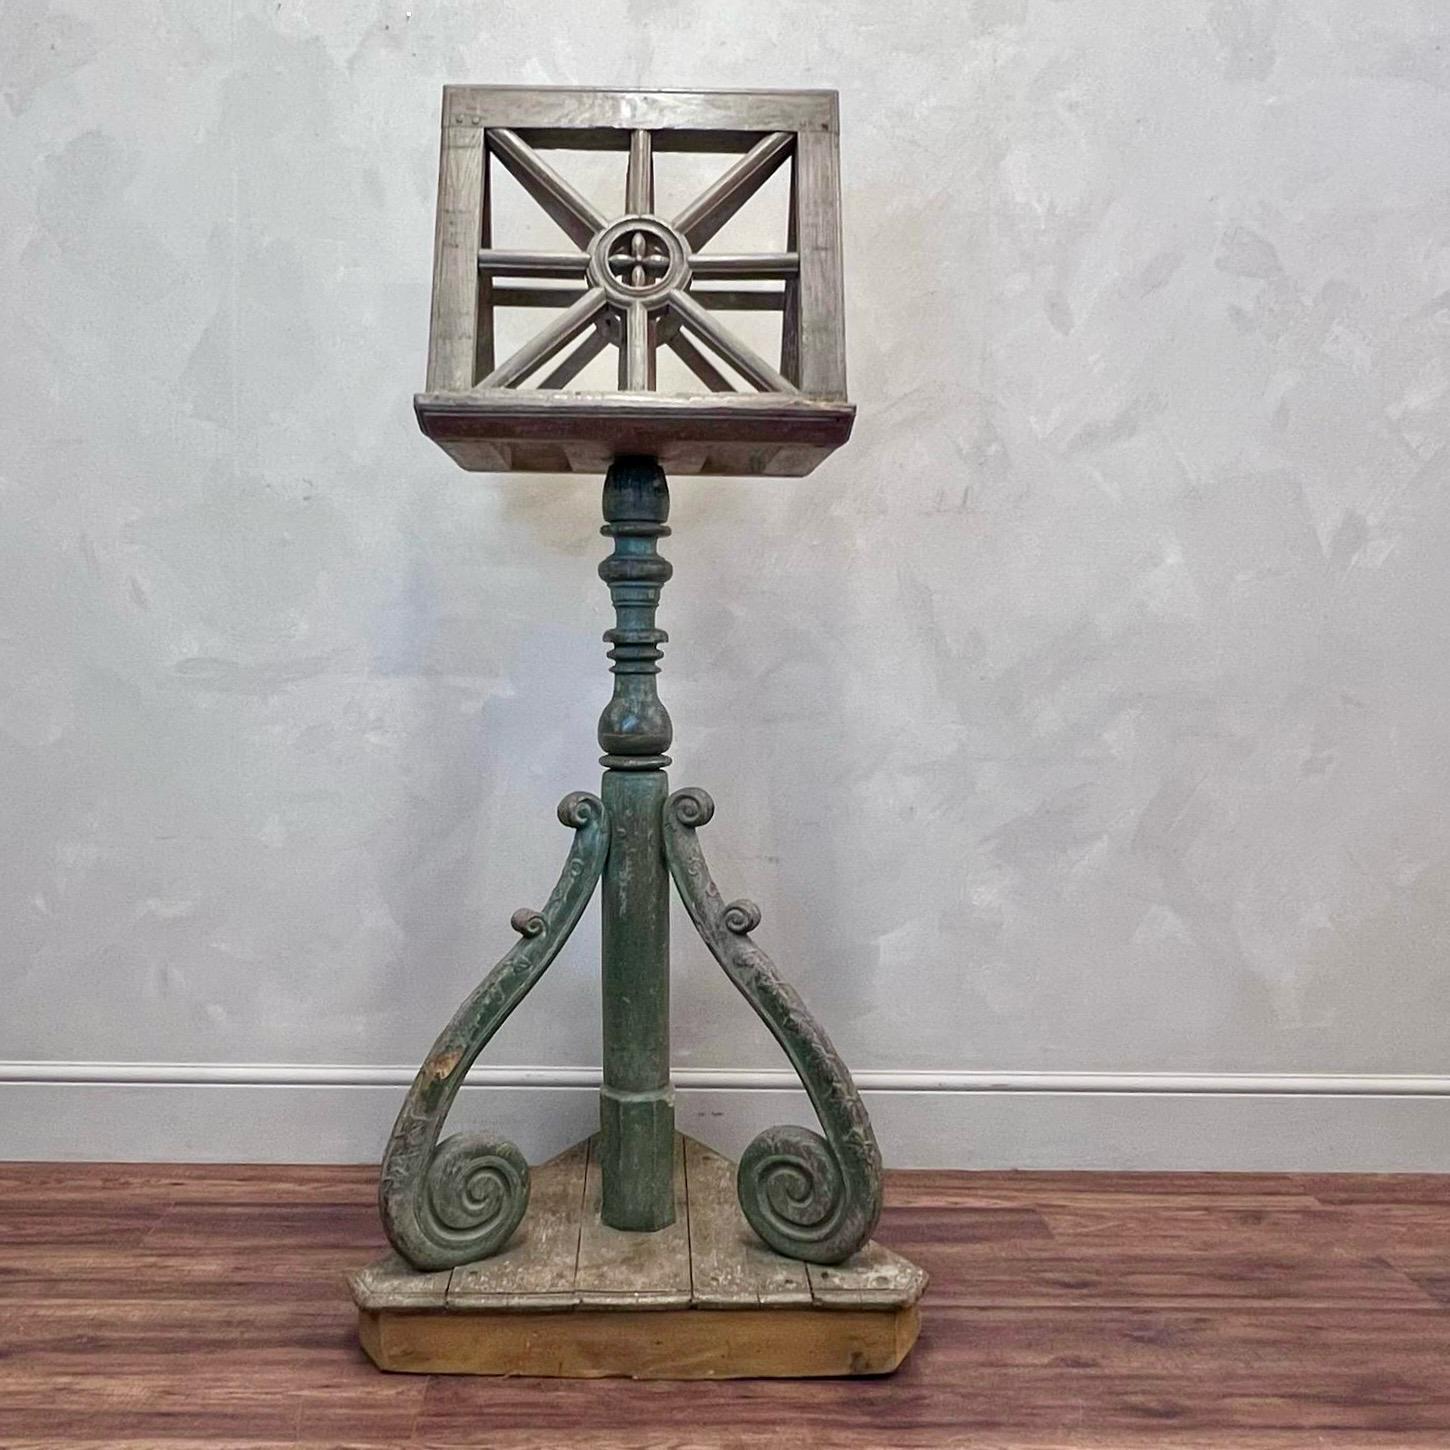 Large scale 19th century Lectern.
Original green scraped paint, hand carved scrolled legs.
The top of the lectern is removable and can also rotate.
This would be an amazing decorators piece for the home to showcase books / art 

France -